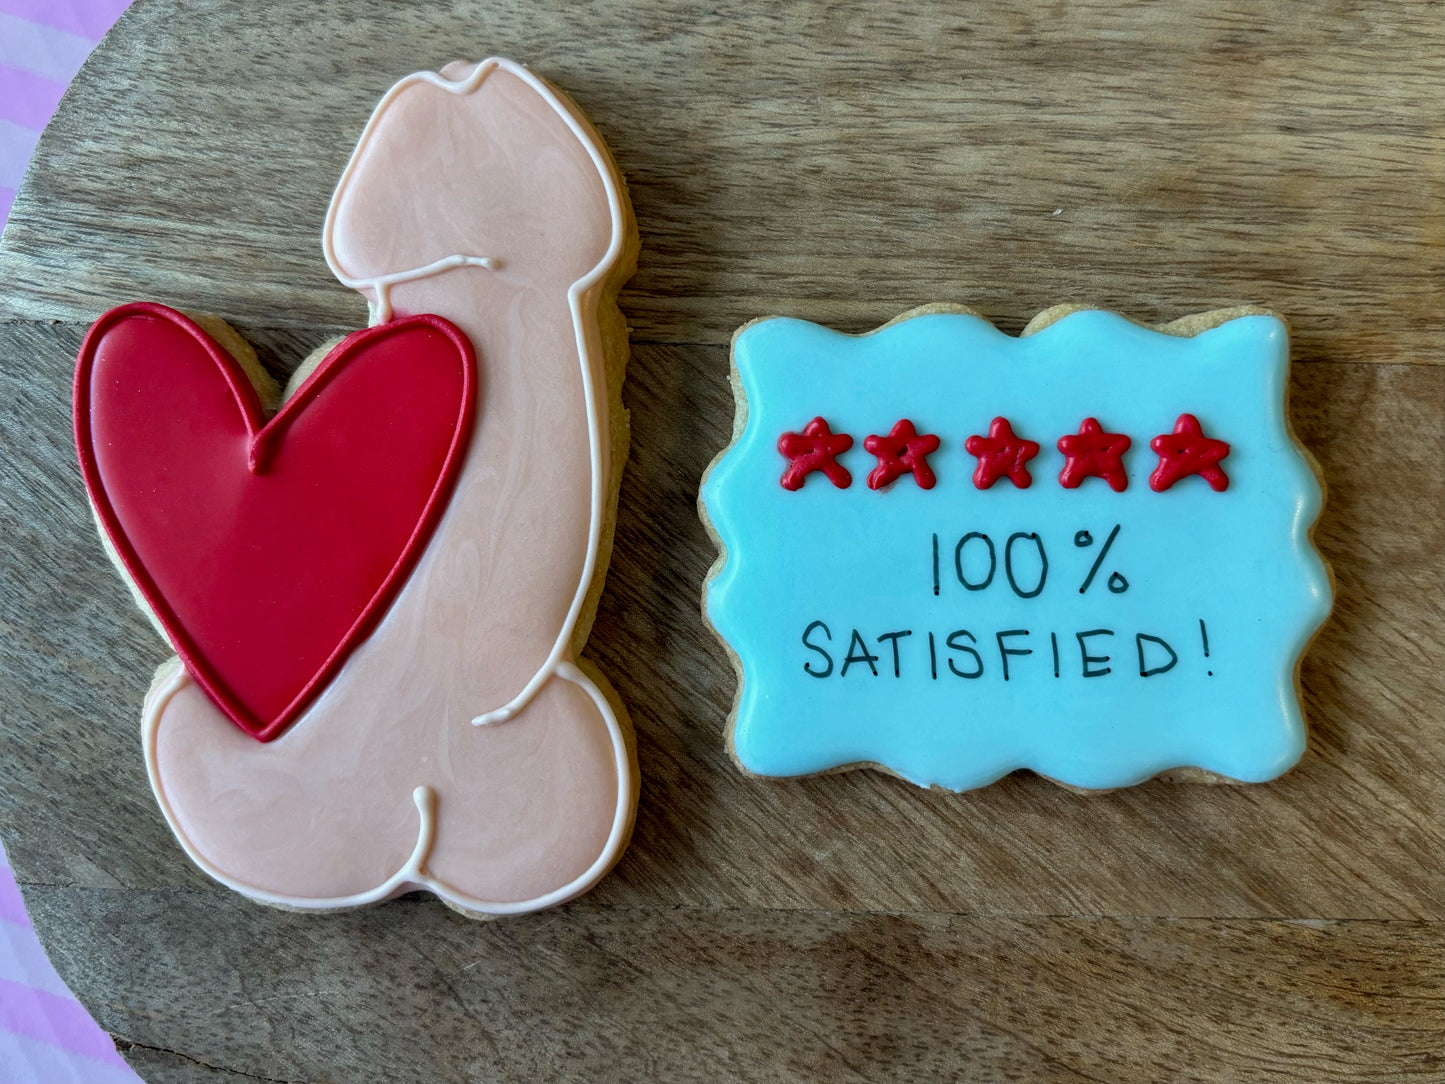 100% satisfied penis and heart custom decorated cookies available in your choice of color and design. Starting at $42/dozen.